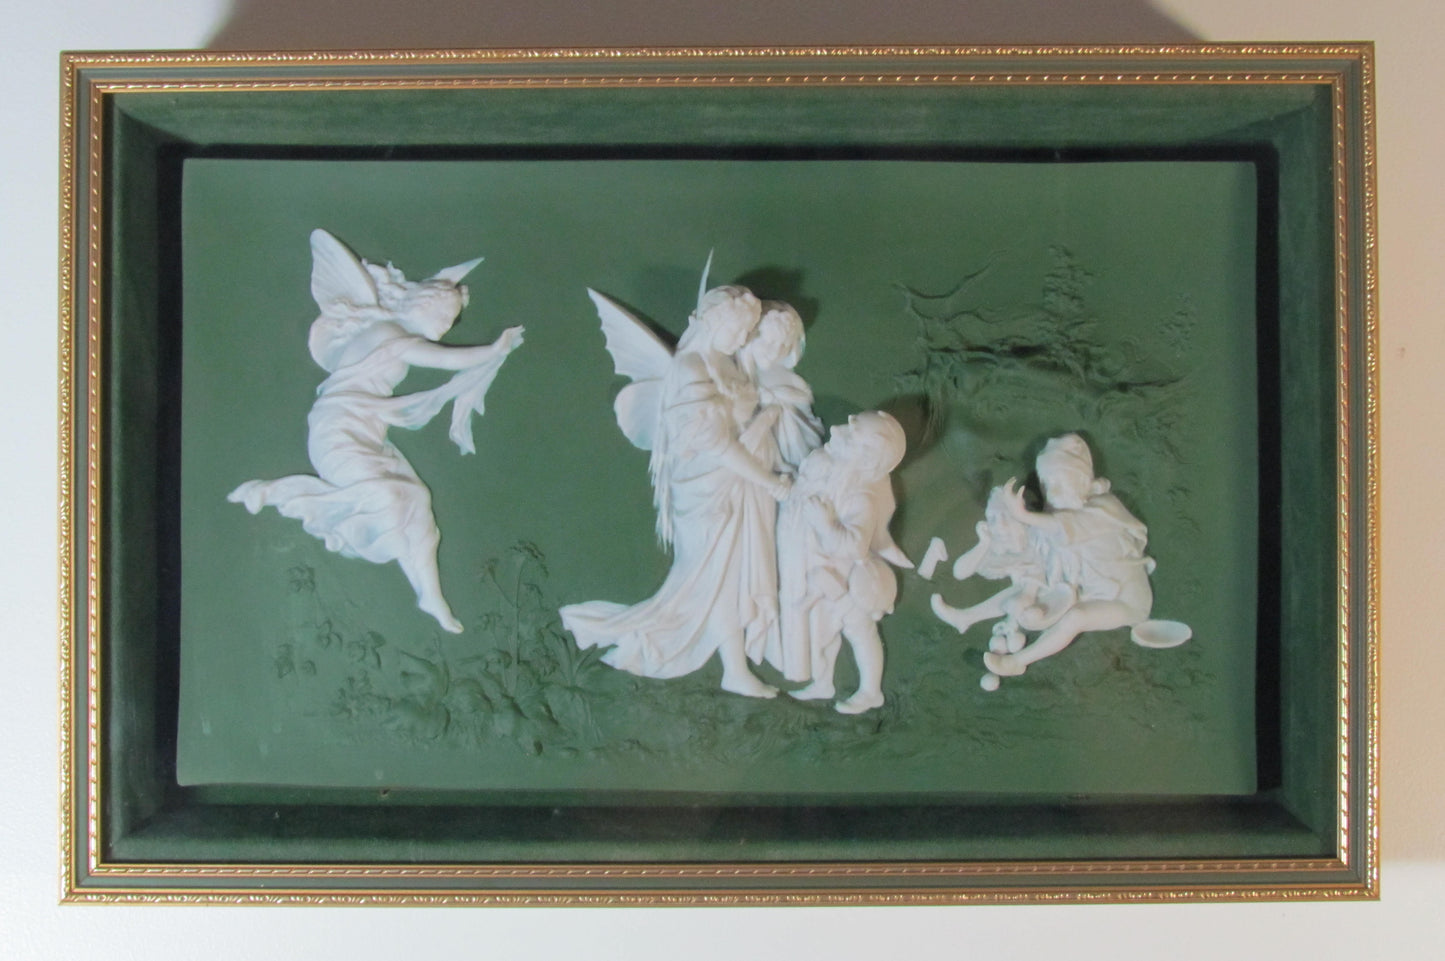 Jasper Ware Plaque In An Art Nouveau Theme With Angels & Nymphs Possibly Volkstedt